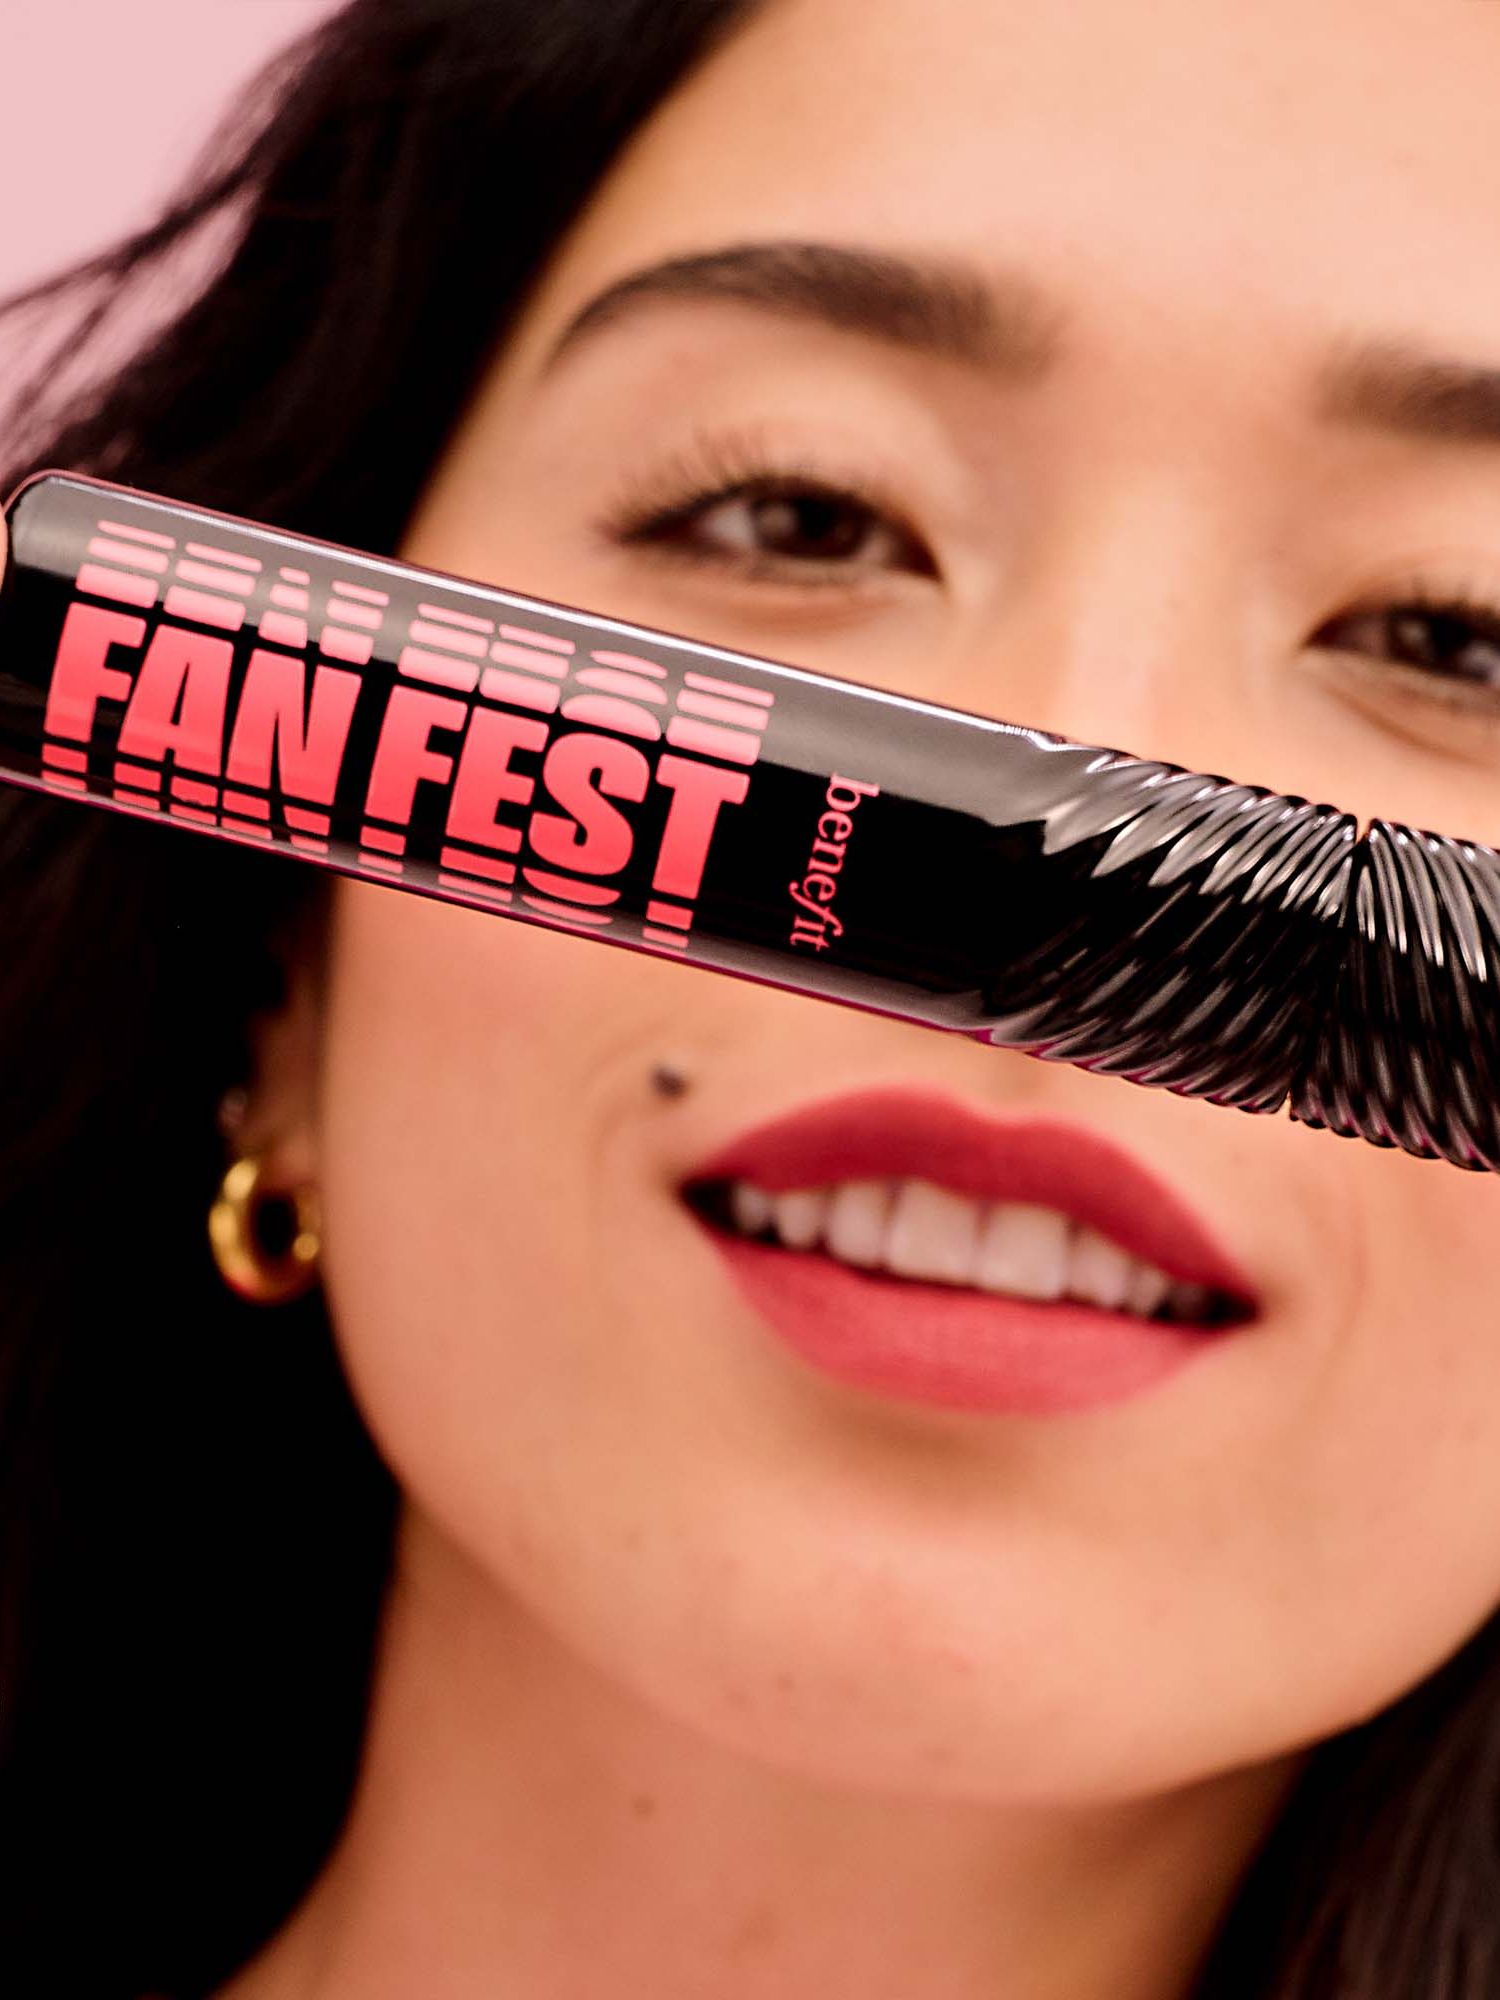 image of a girl with a Benifit Fan Fest mascara